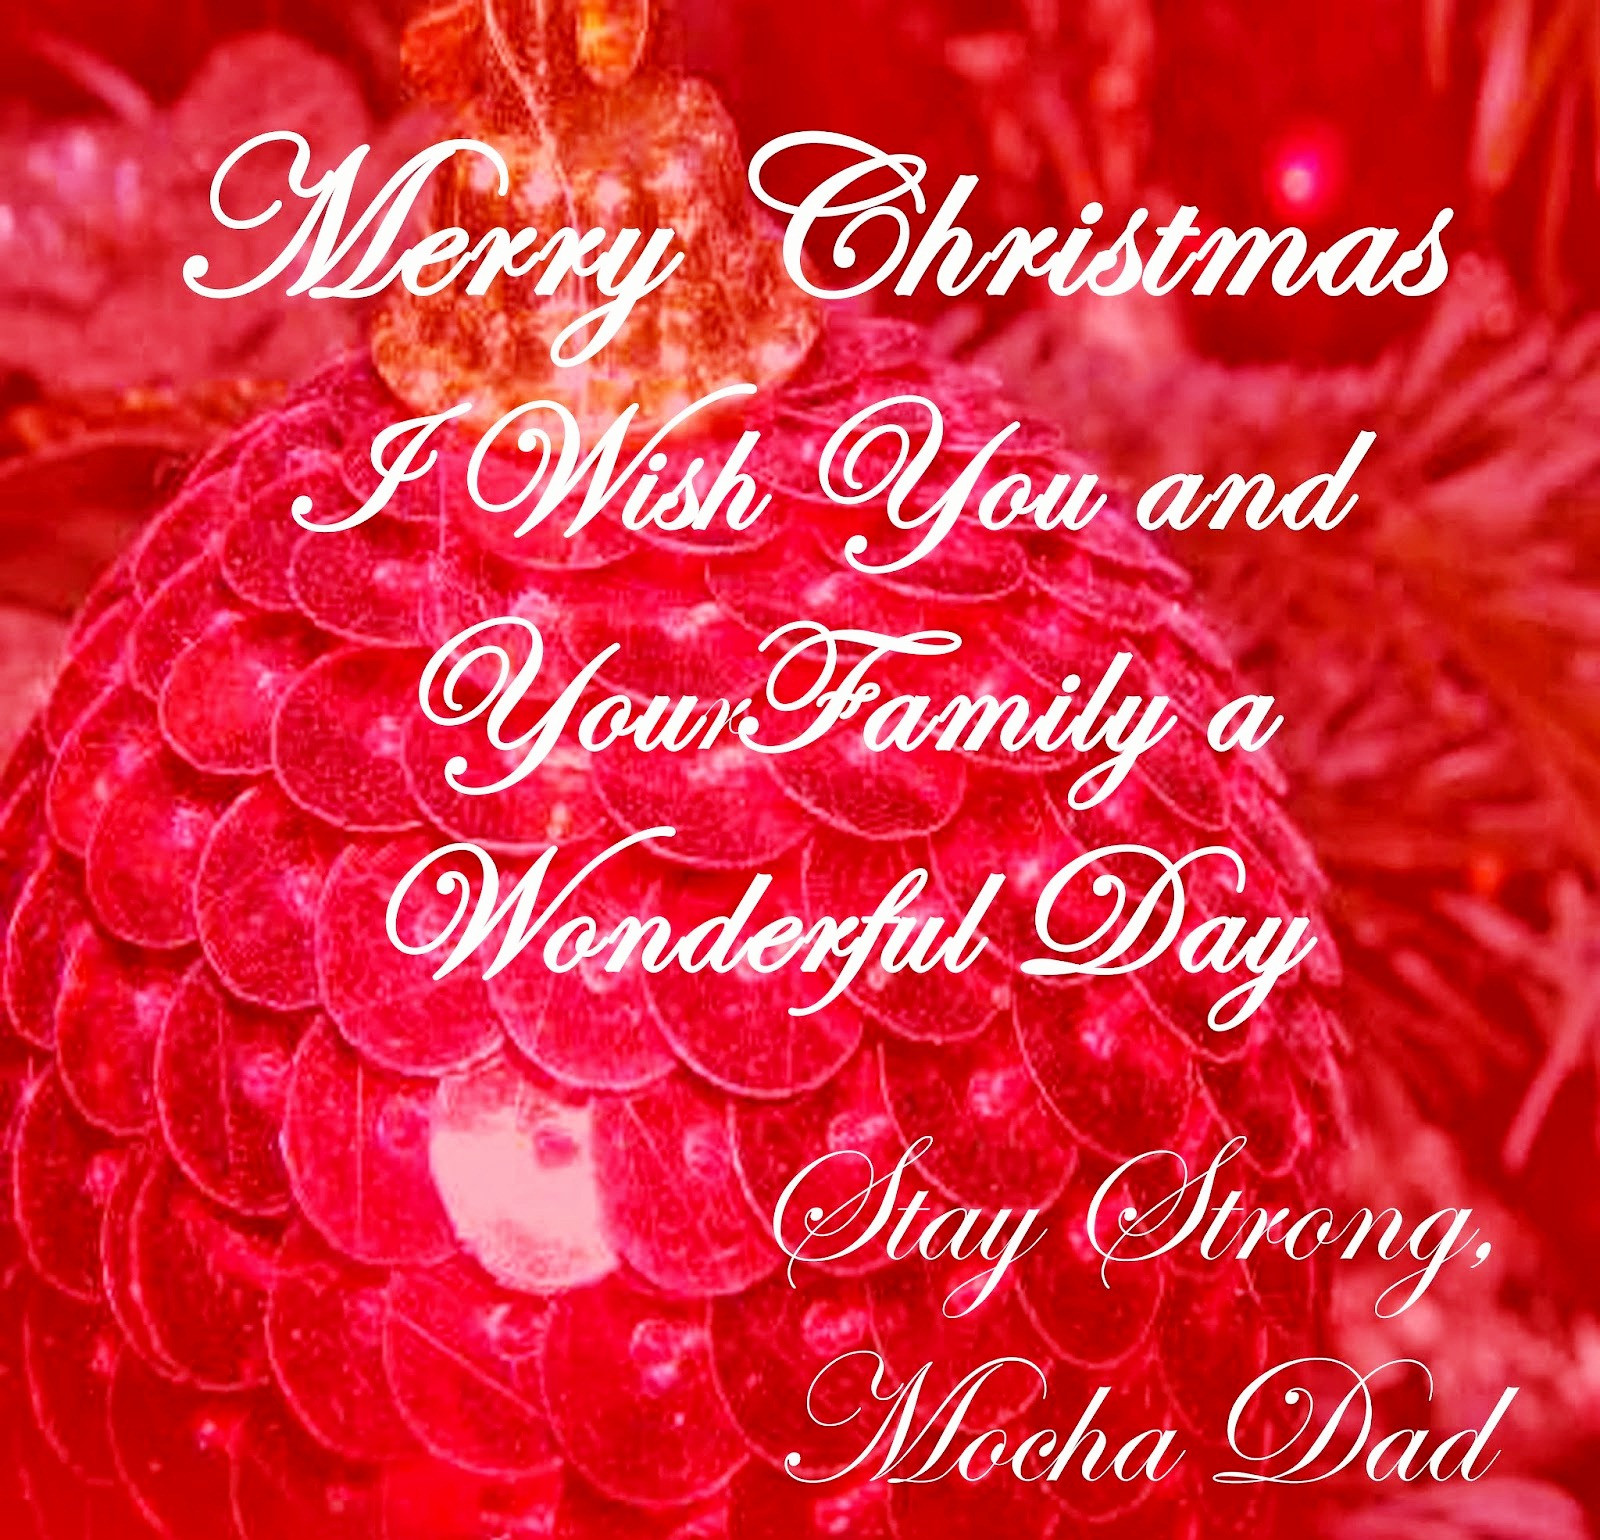 Merry Christmas Wishes Quotes
 20 Merry Christmas Quotes 2014